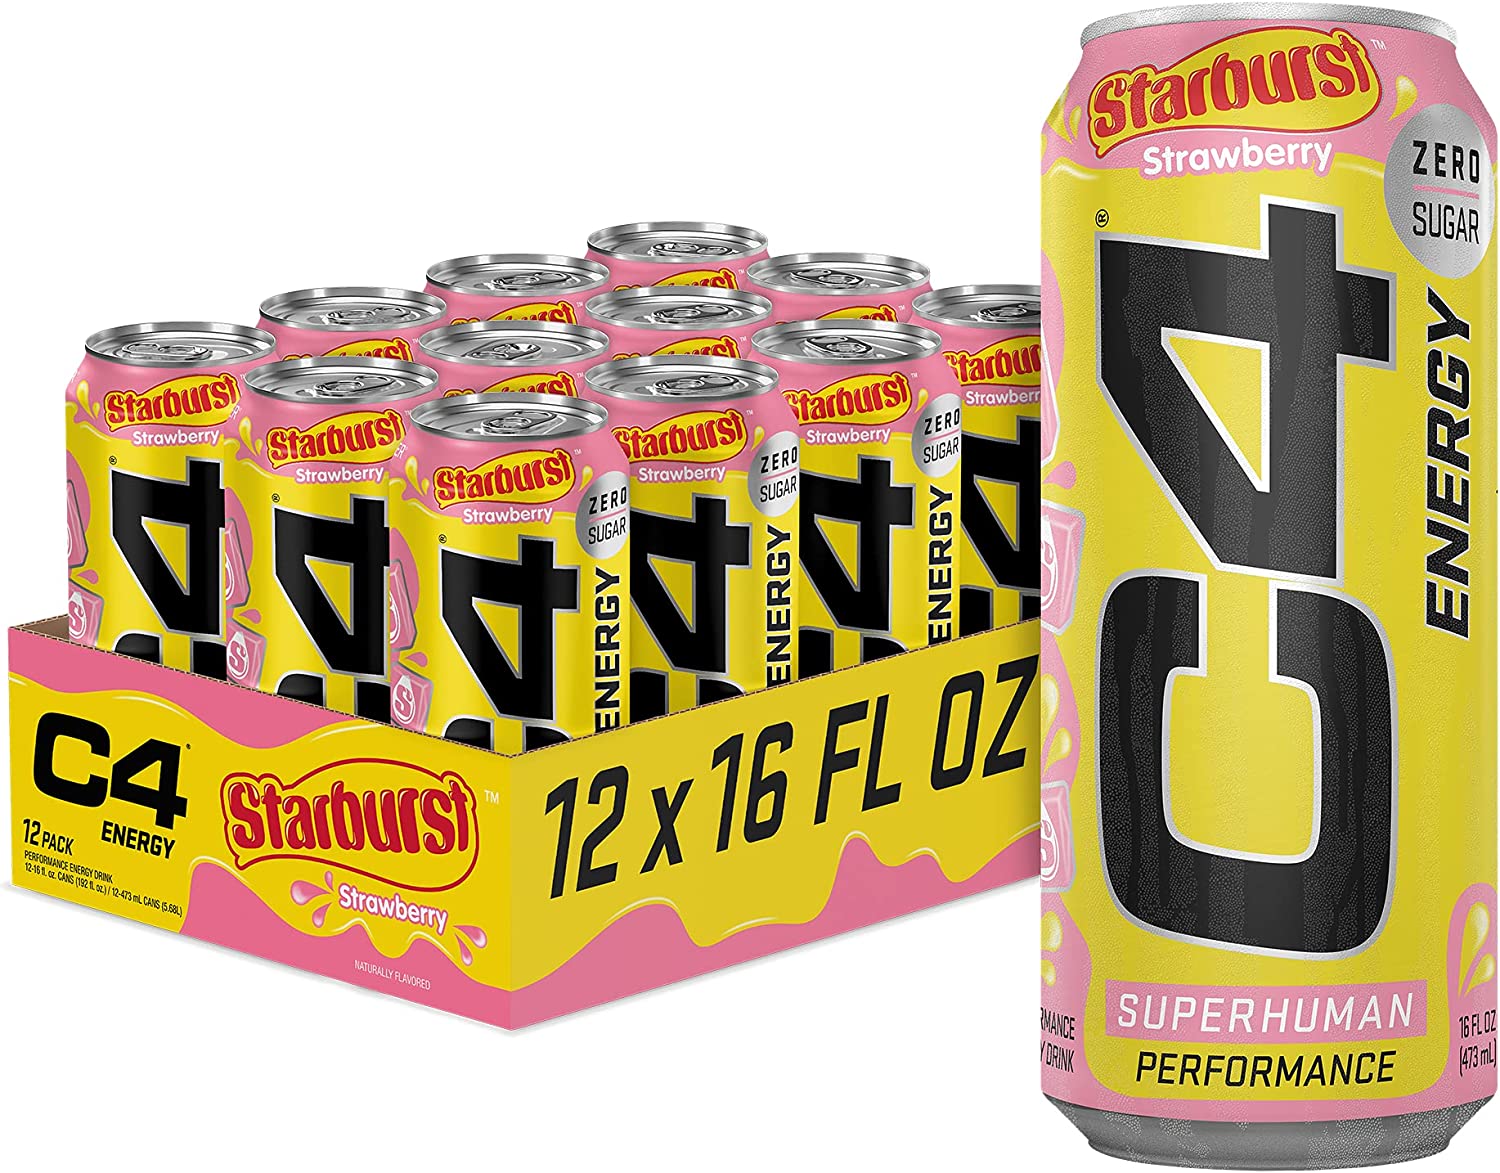 12-Pack 16-Oz Cellucor C4 Sugar Free Energy Drink (Starburst Strawberry) $16.45 w/ S&S + Free S&H w/ Prime or $25+